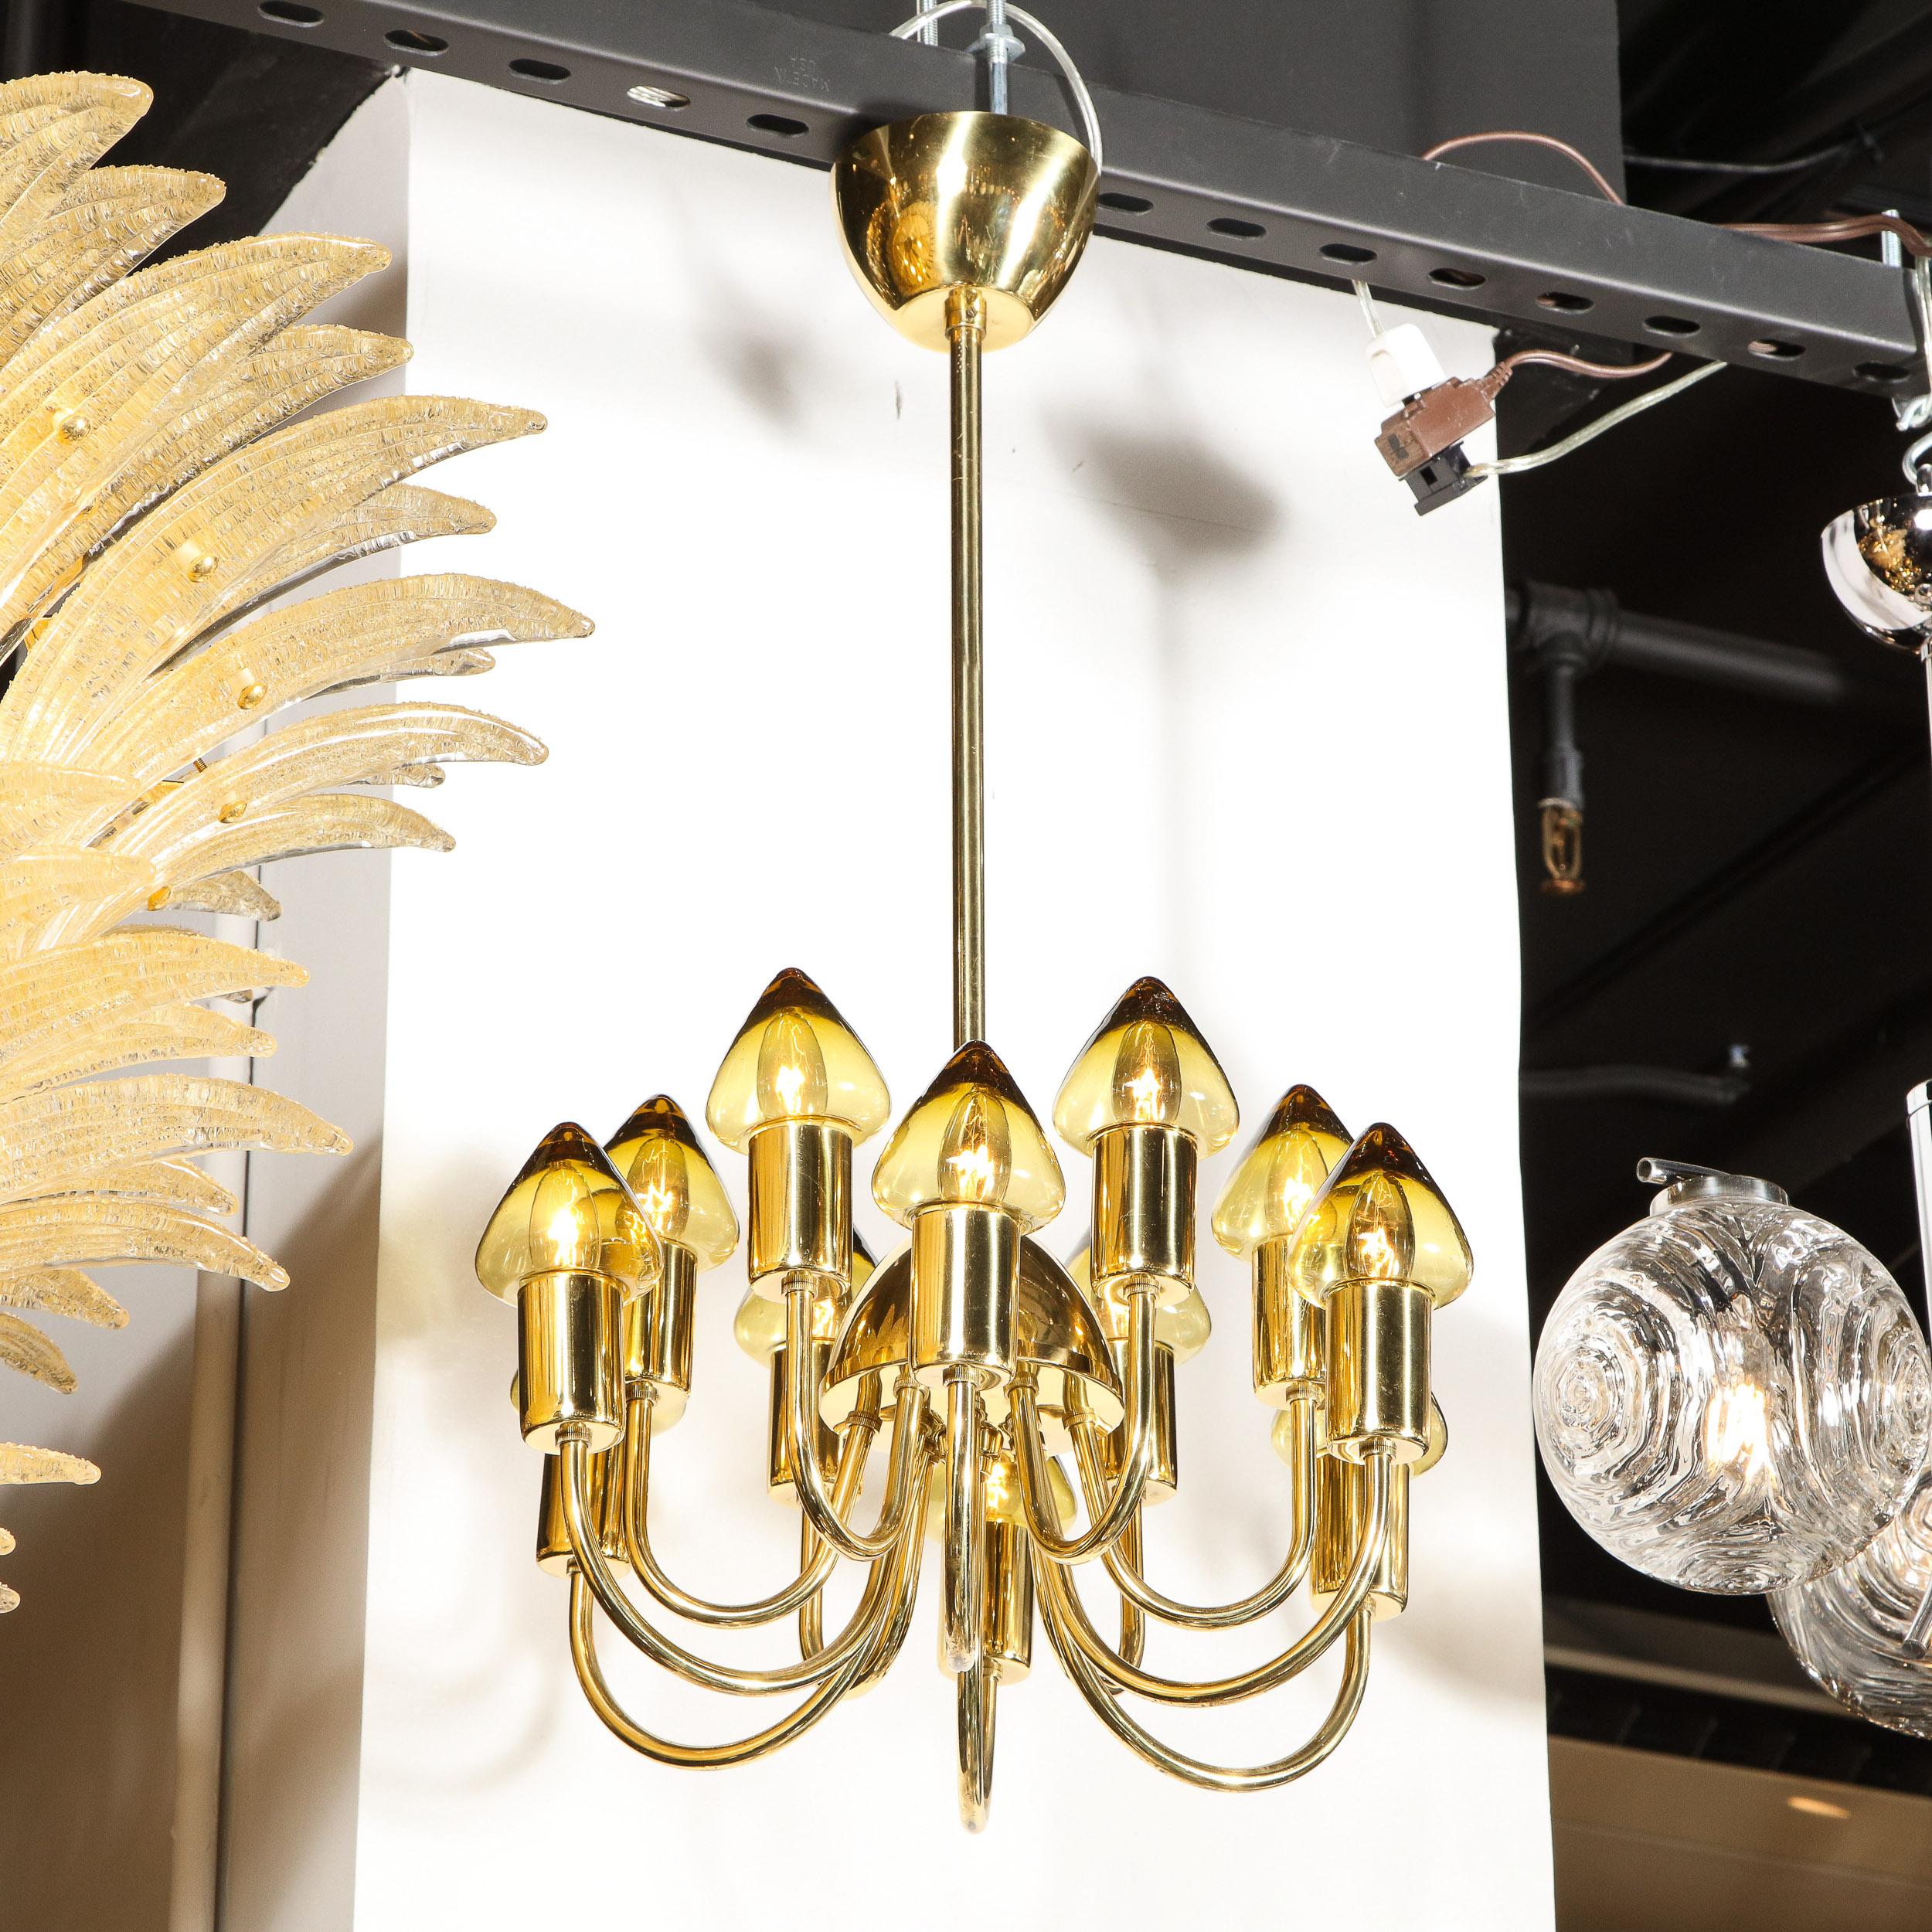 Mid-20th Century Sophisticated Midcentury Modernist Twelve-Arm Chandelier by Hans-Agne Jakobsson For Sale